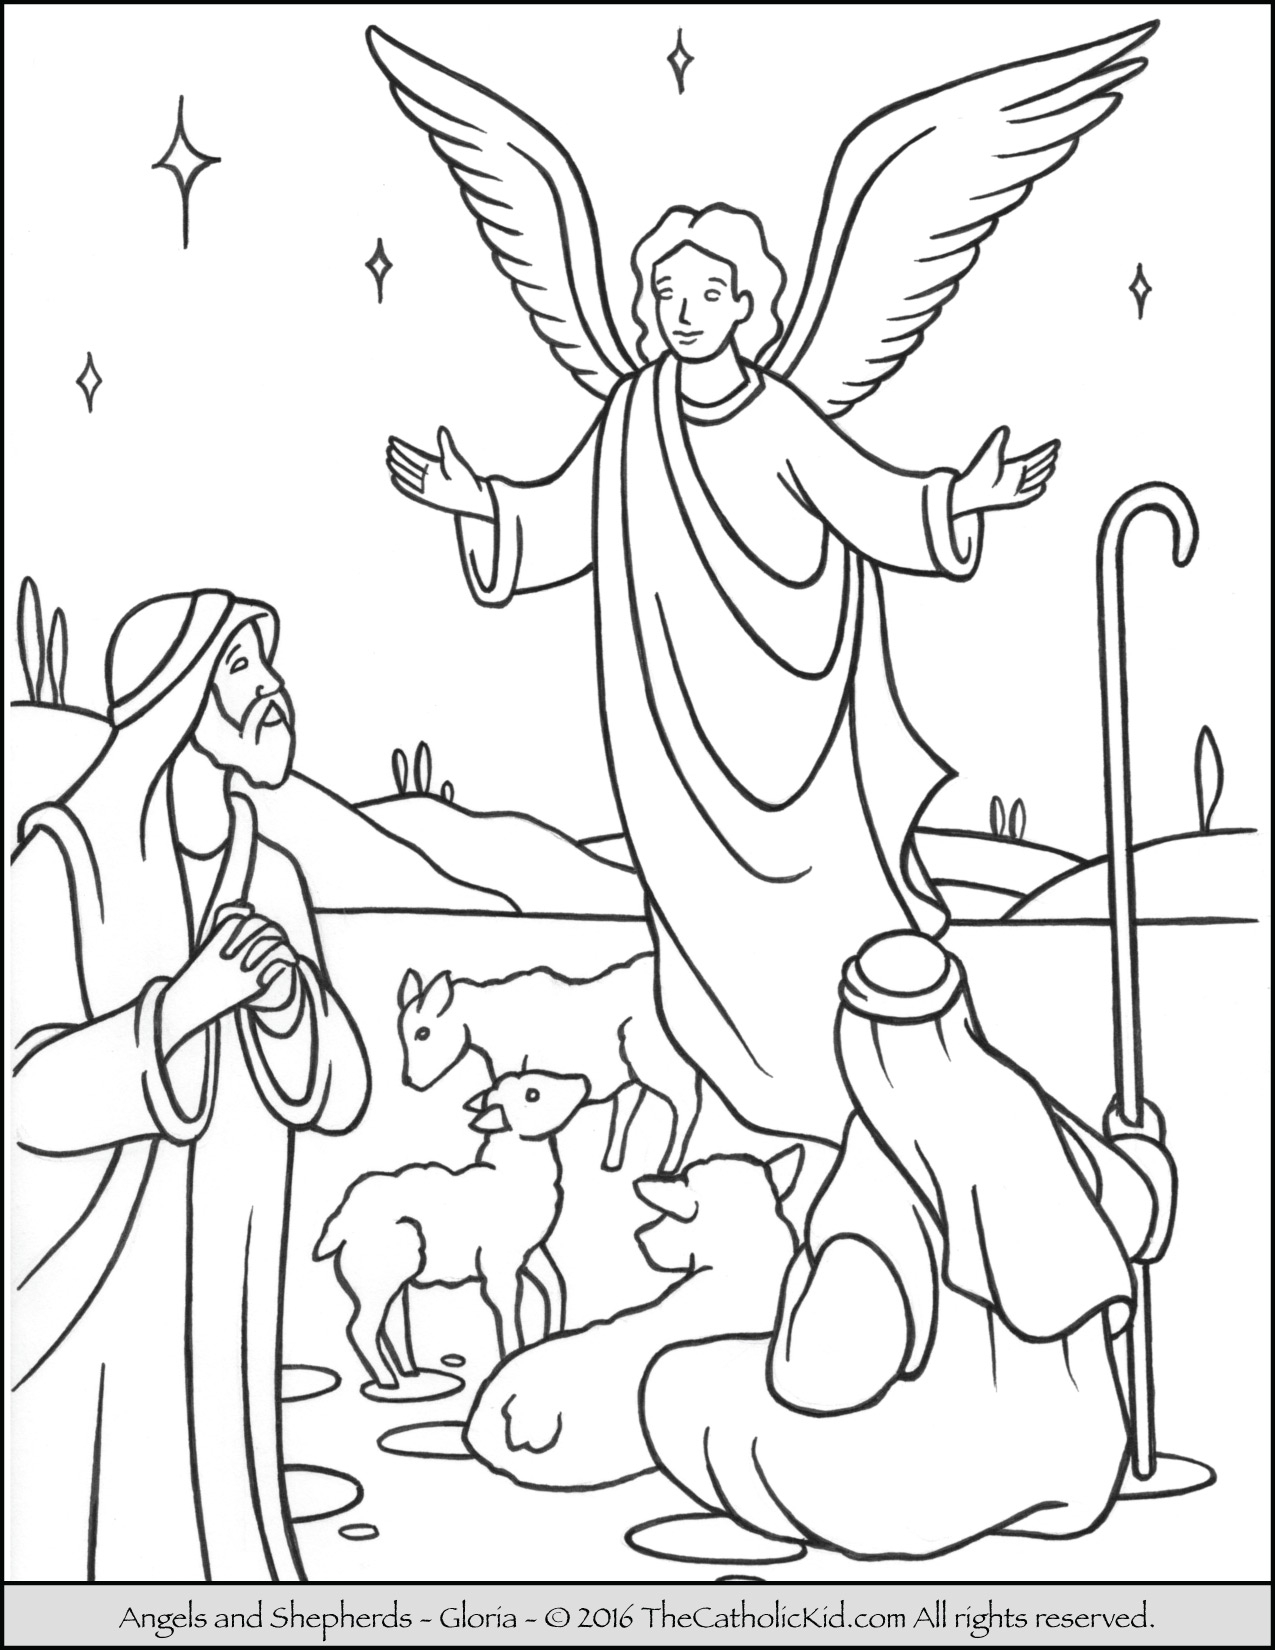 The Good Shepherd Coloring Page Angels Shepherds Gloria Coloring Page Thecahtolickid